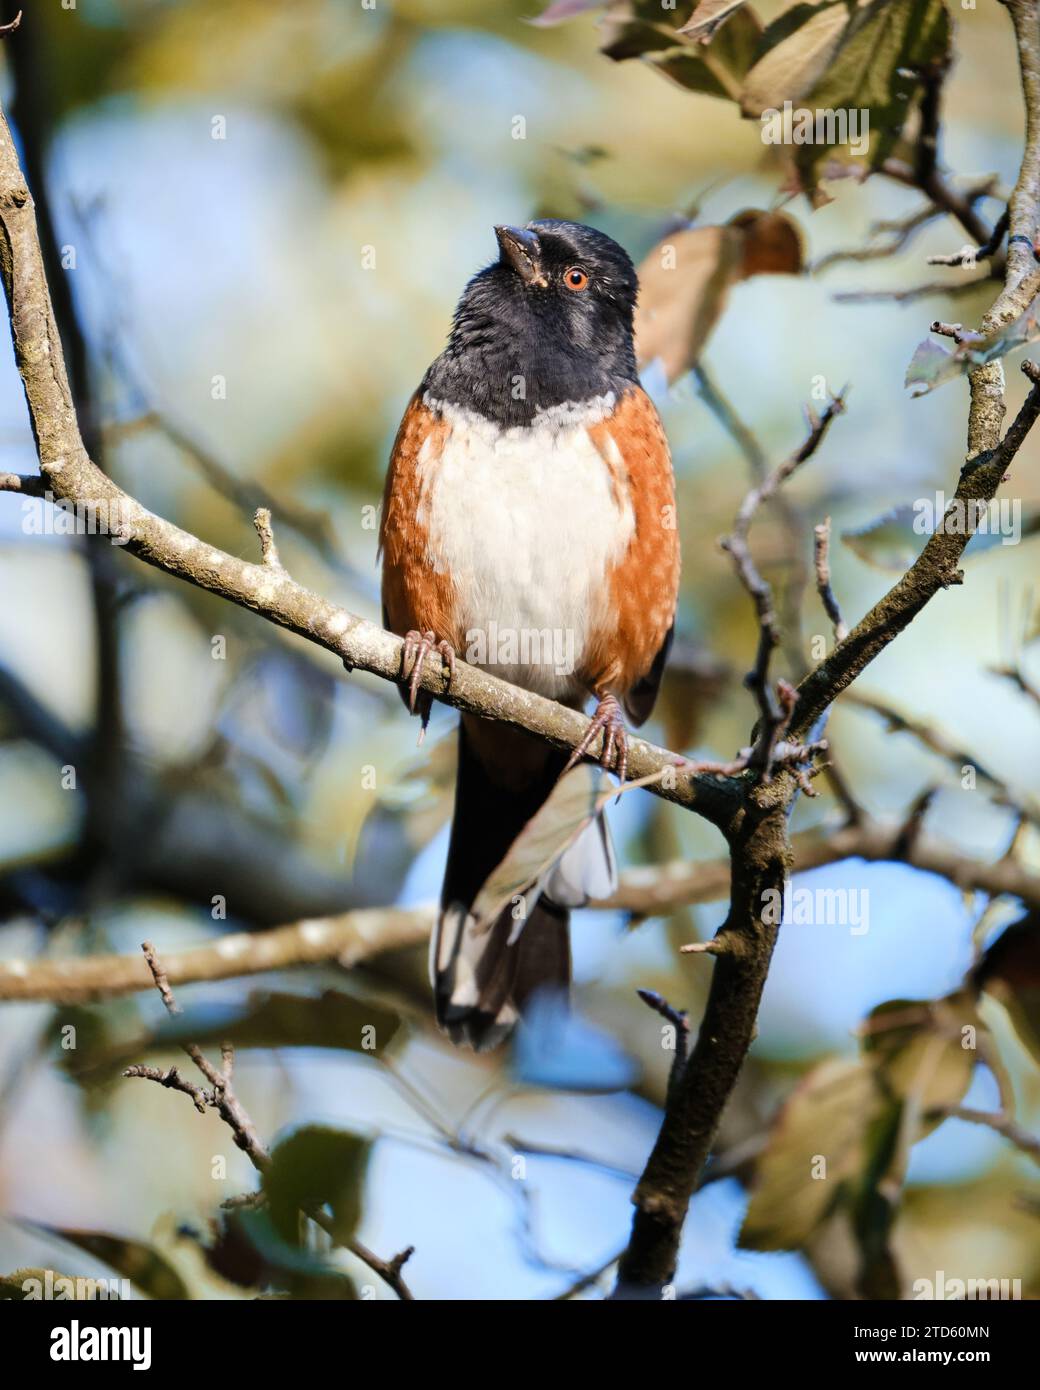 Spotted Towhee, Pipilo maculatus, perched in tree branch Stock Photo